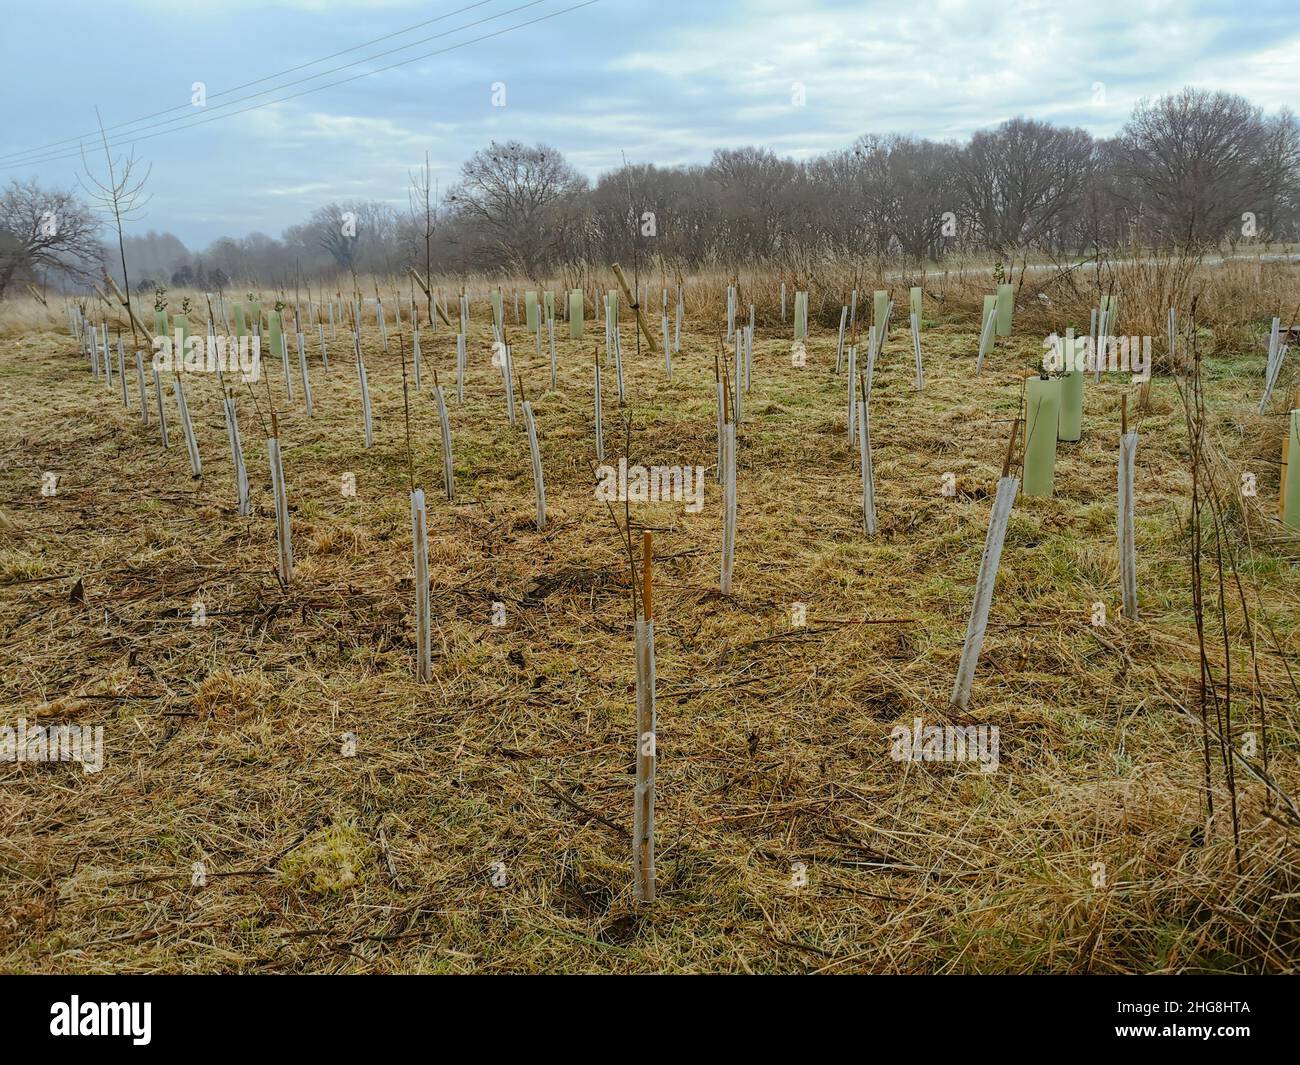 Culture of tree saplings on a field meant for reforestation of areas where the number of trees decreased Stock Photo